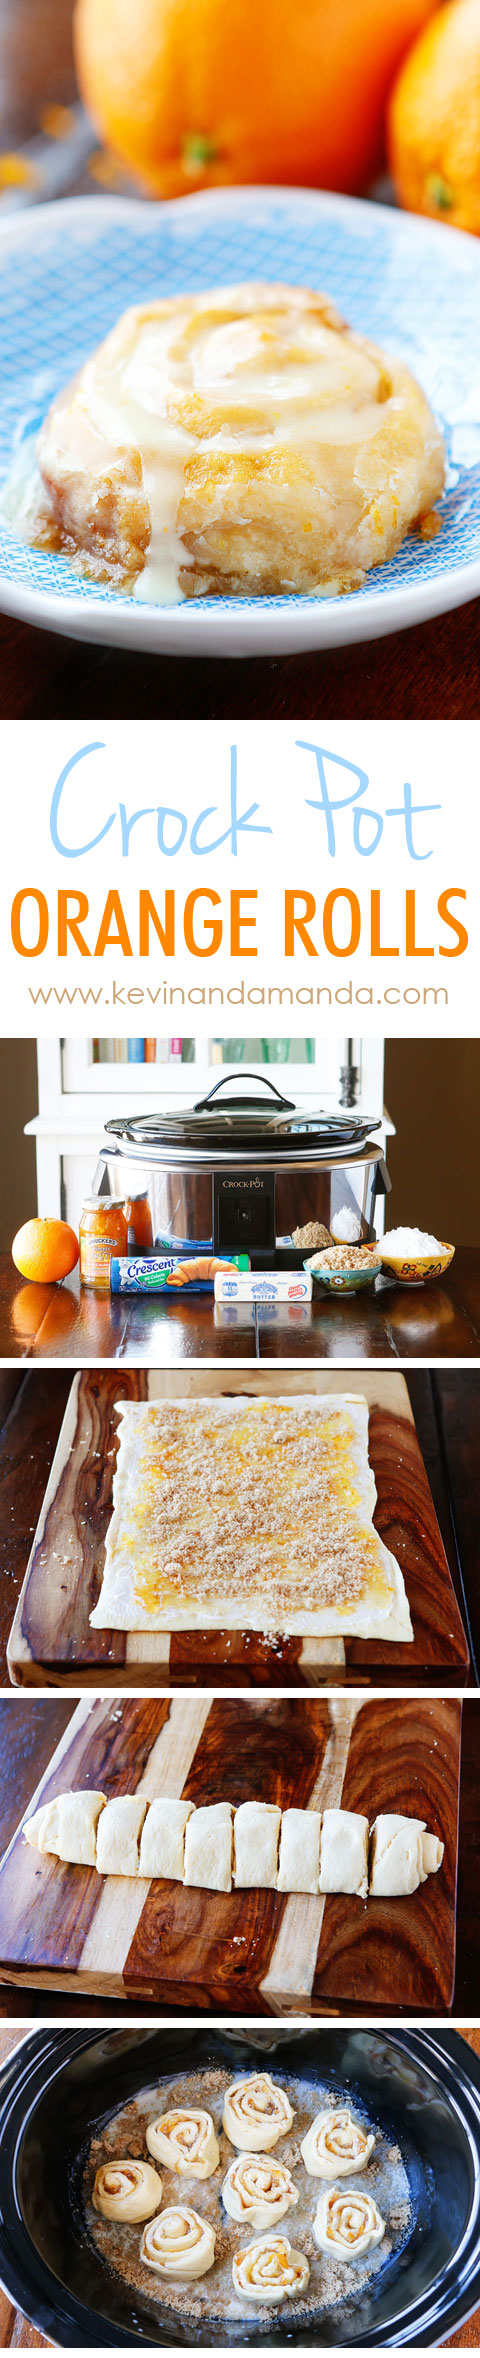 These Orange Sweet Rolls are made in a crock pot and turn out ULTRA soft and gooey!! Plus you can keep them warm in the crock pot so they always taste fresh out of the oven!! 